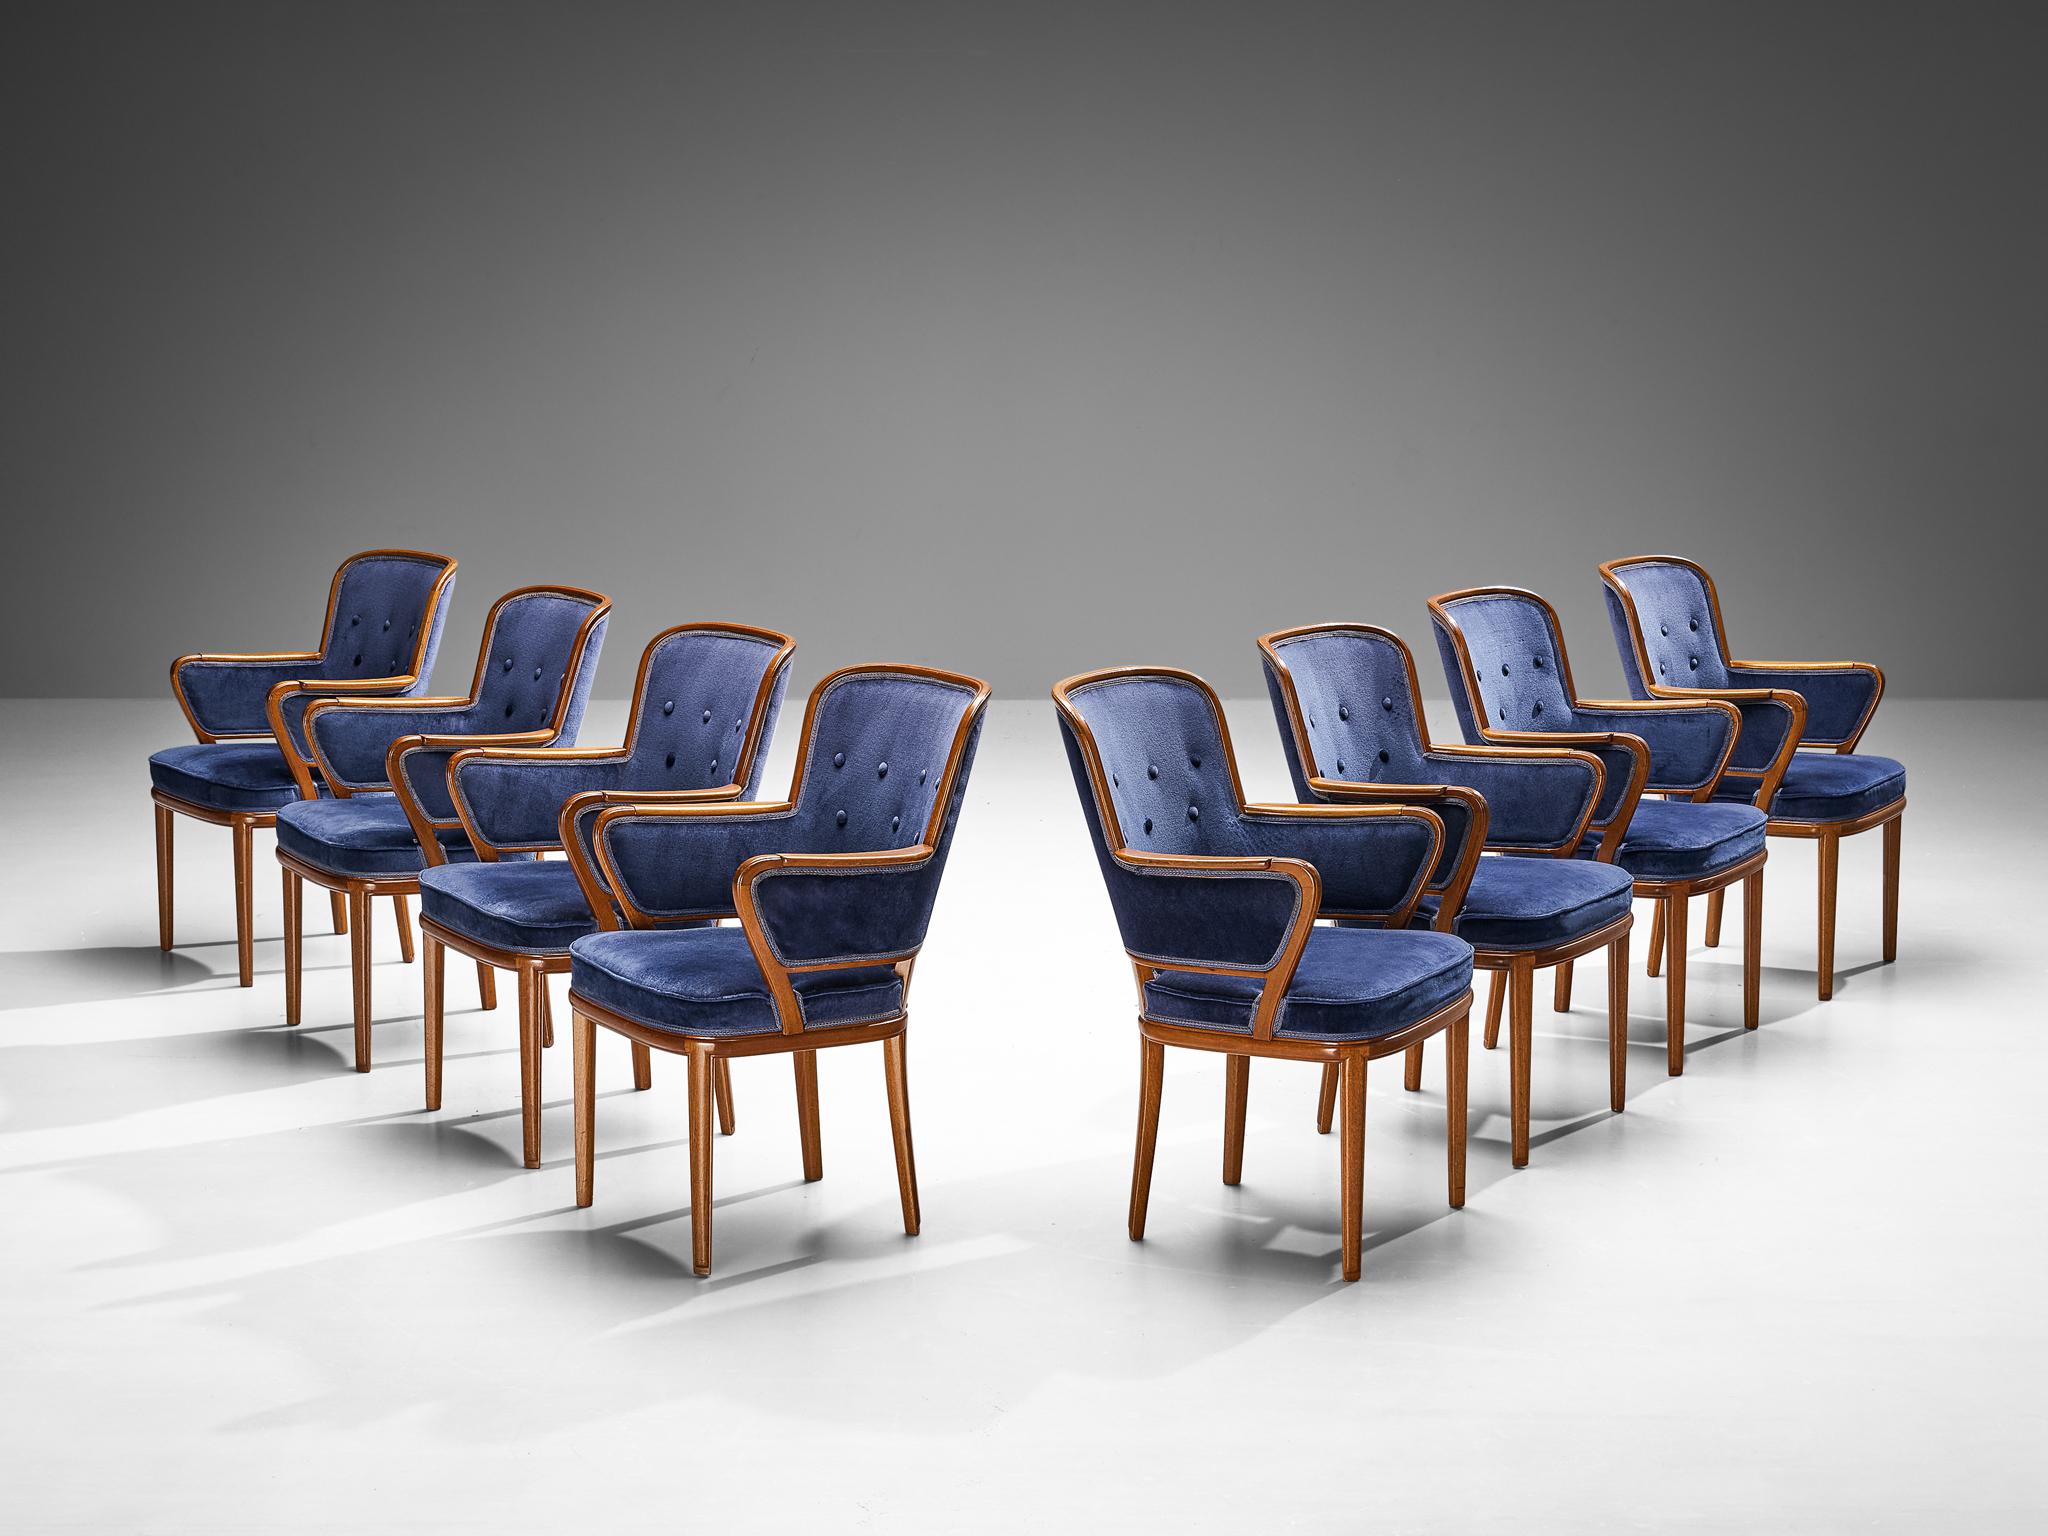 Carl Malmsten, set of eight armchairs, mahogany, blue velvet, Sweden, 1940s

Set of armchairs designed by Swedish designer Carl Malmsten that are hard to come by. These chairs contain a warm mahogany frame, with the grain showing beautifully as seen